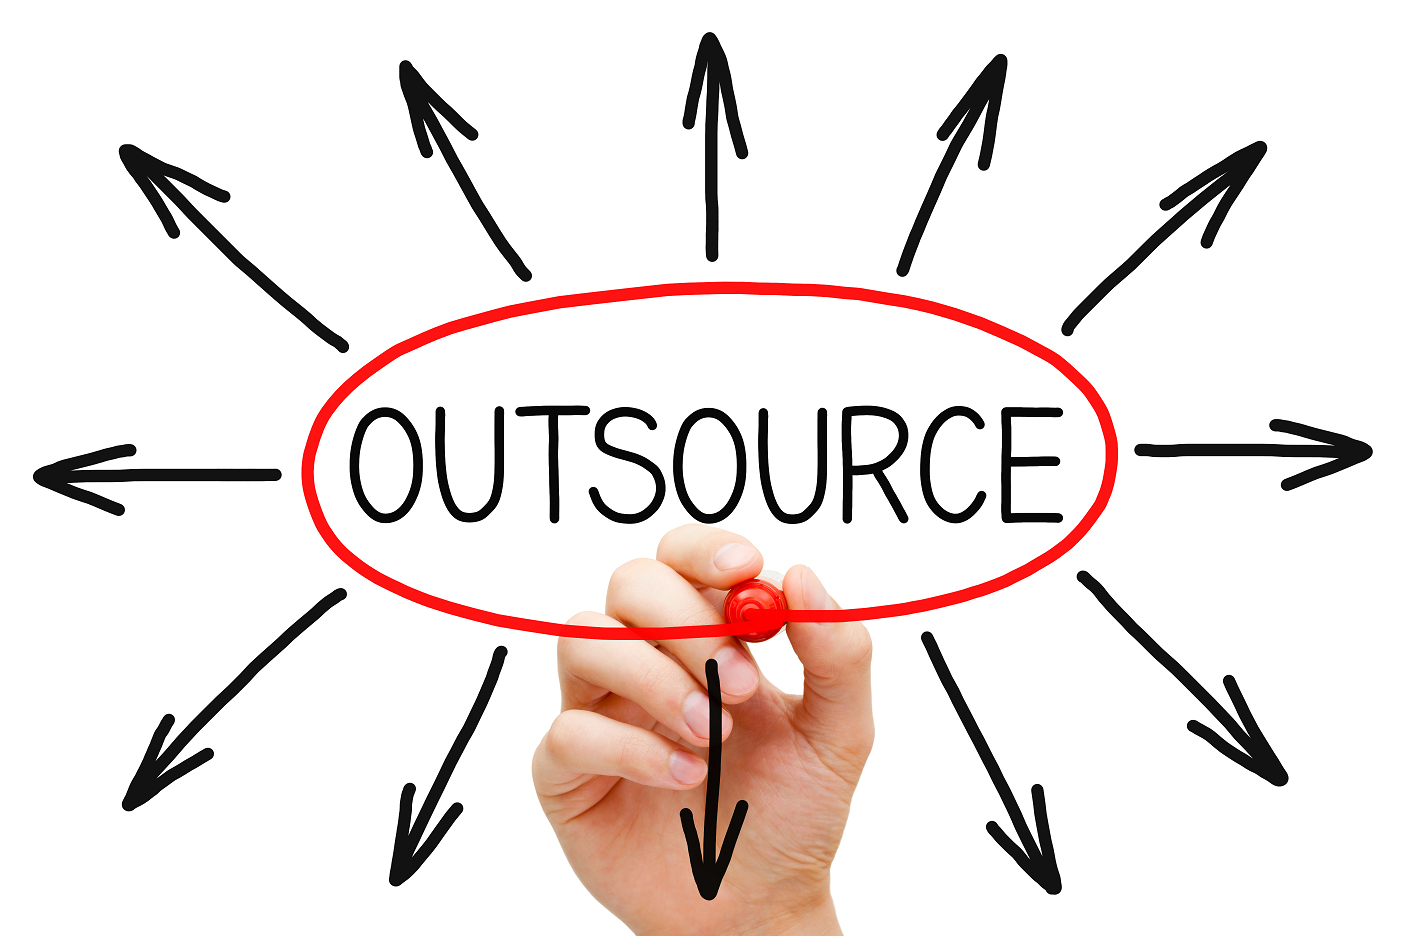 What companies do not outsource jobs